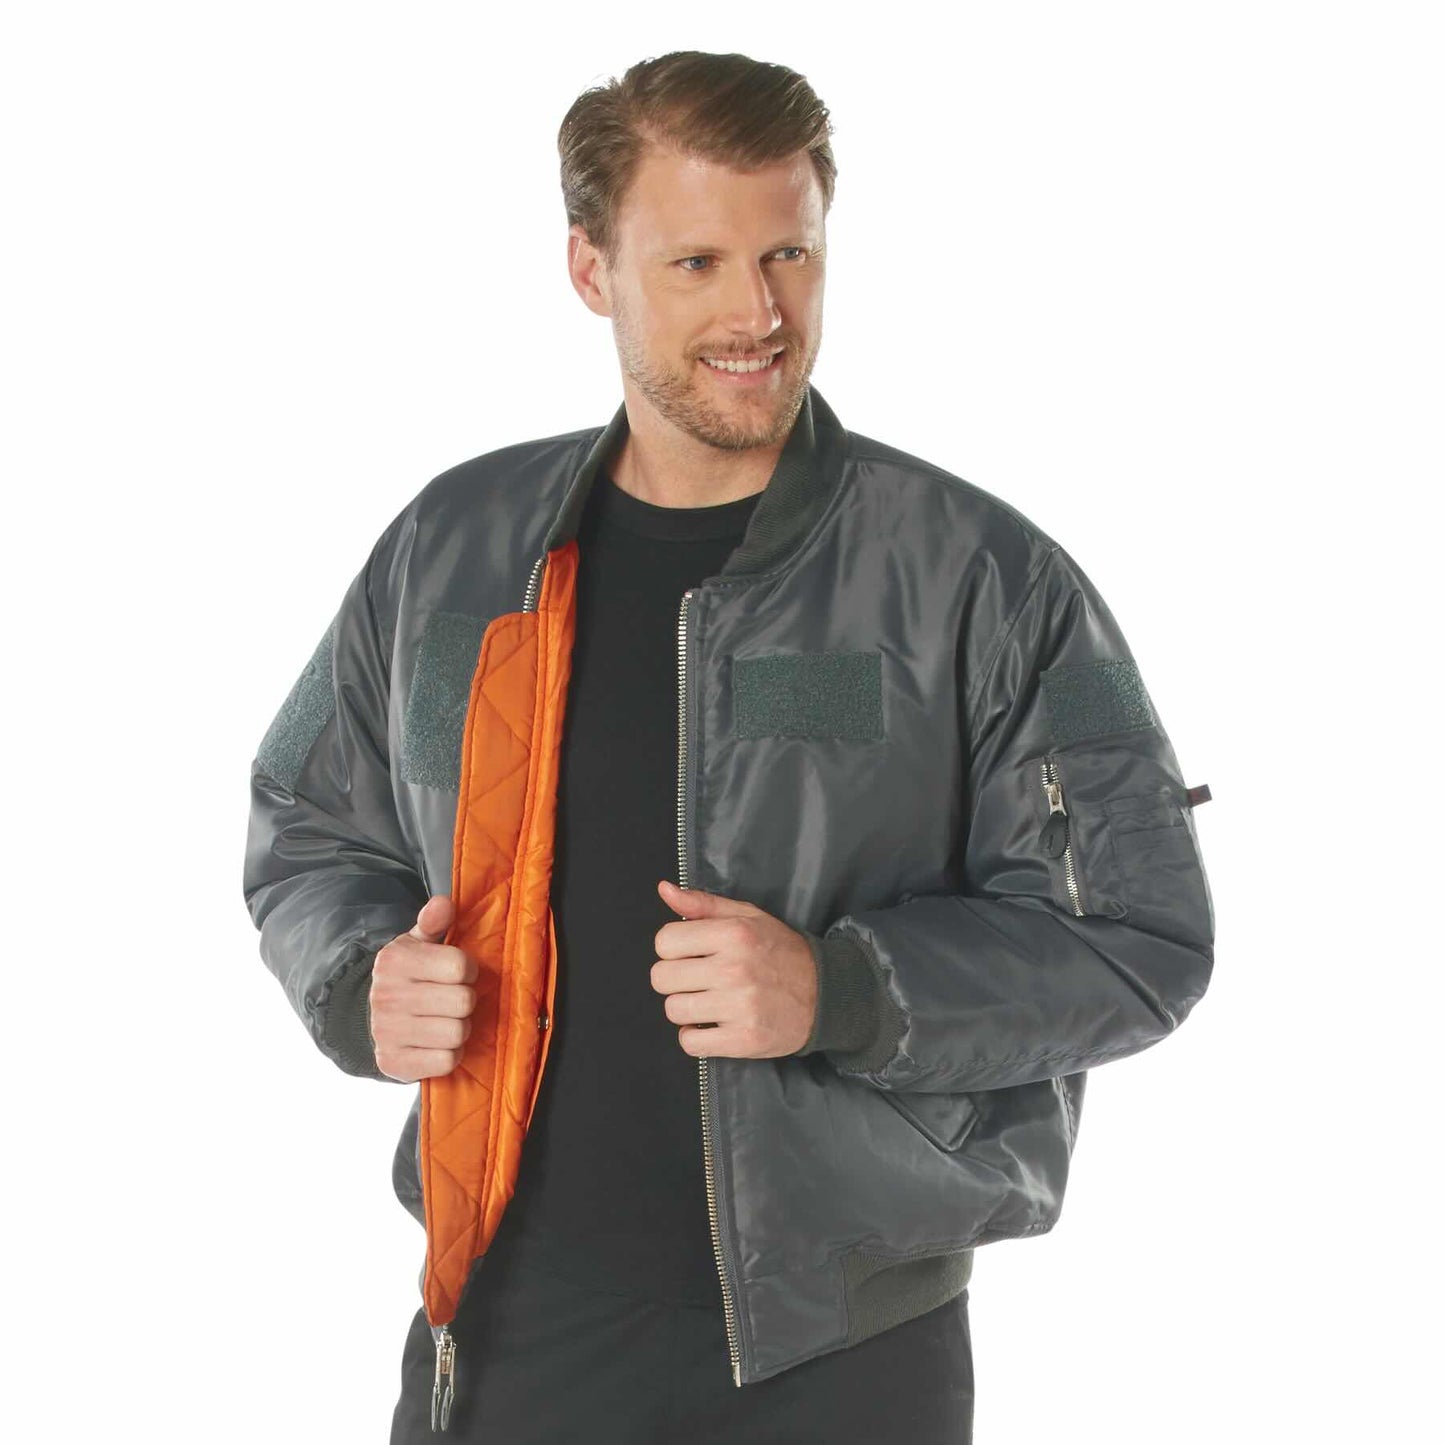 Rothco MA-1 Flight Jacket with Patches